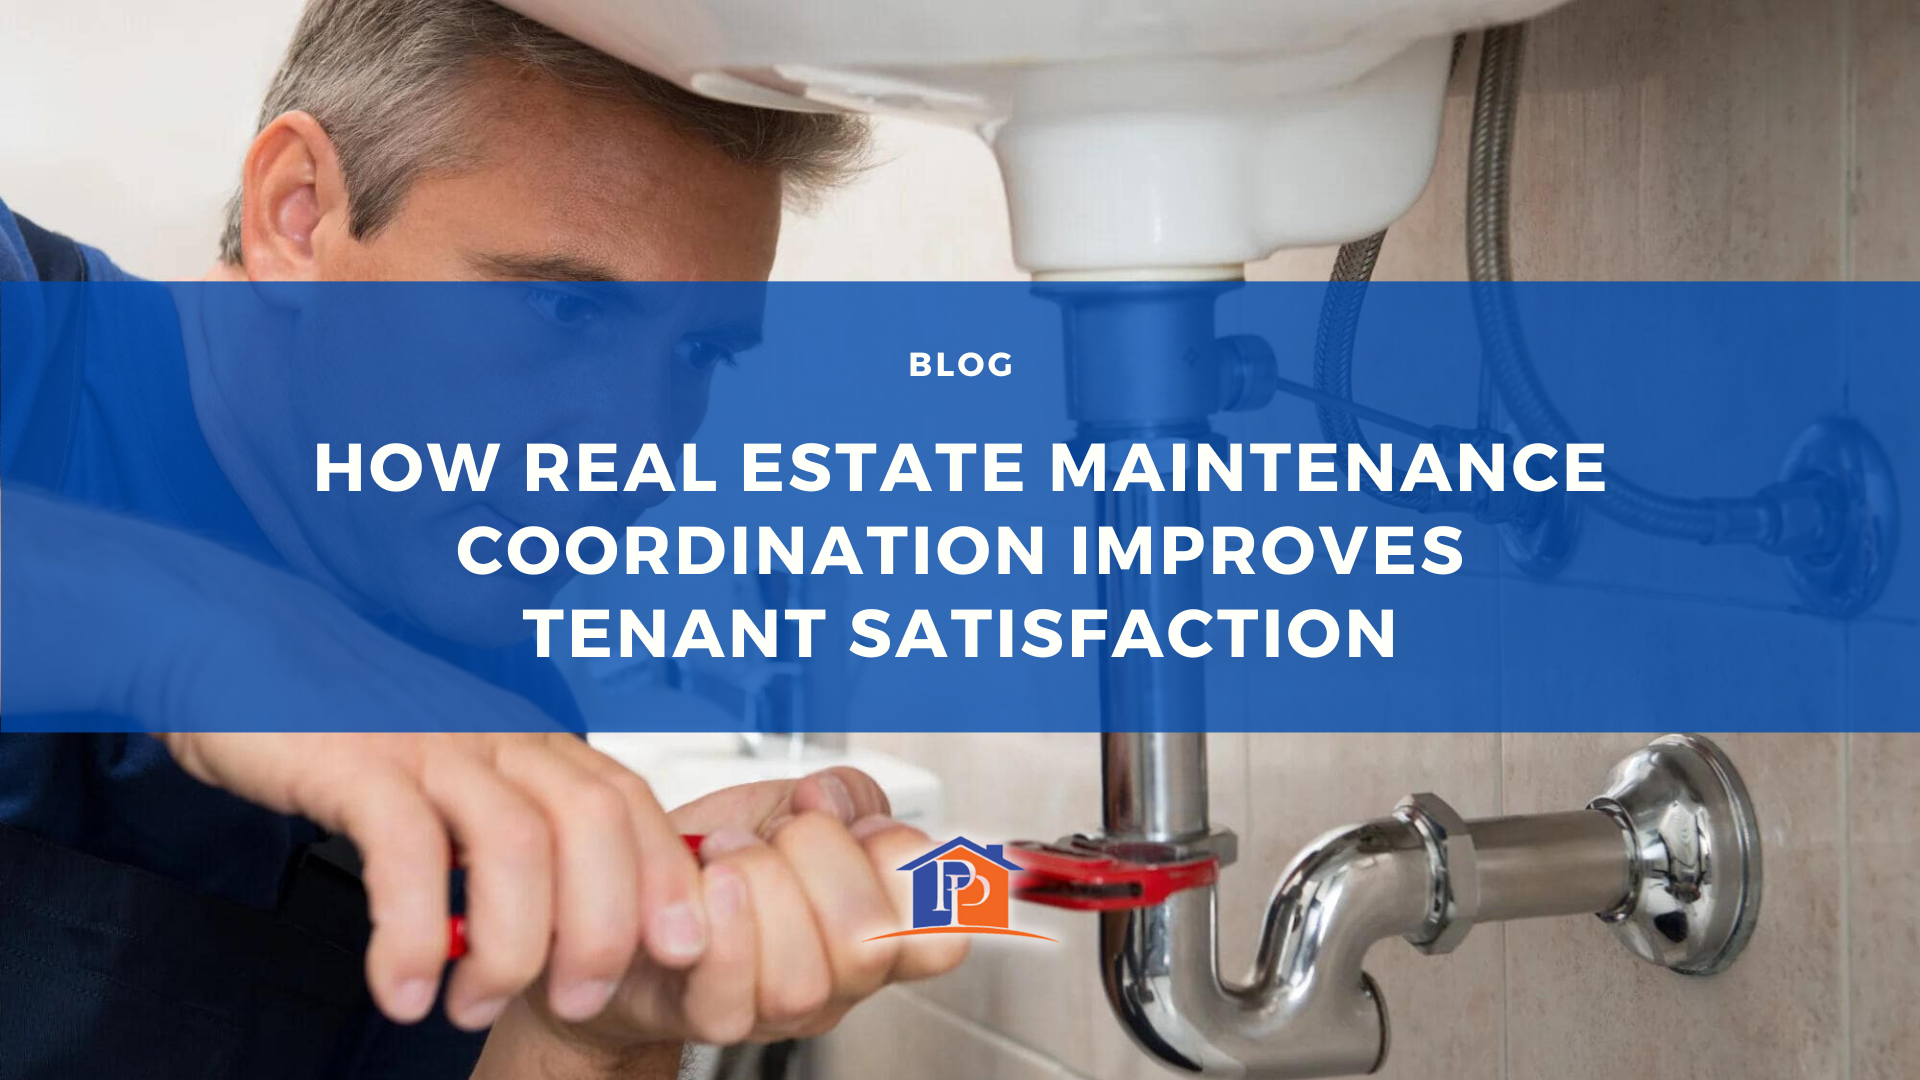 How Real Estate Maintenance Coordination Improves Tenant Satisfaction